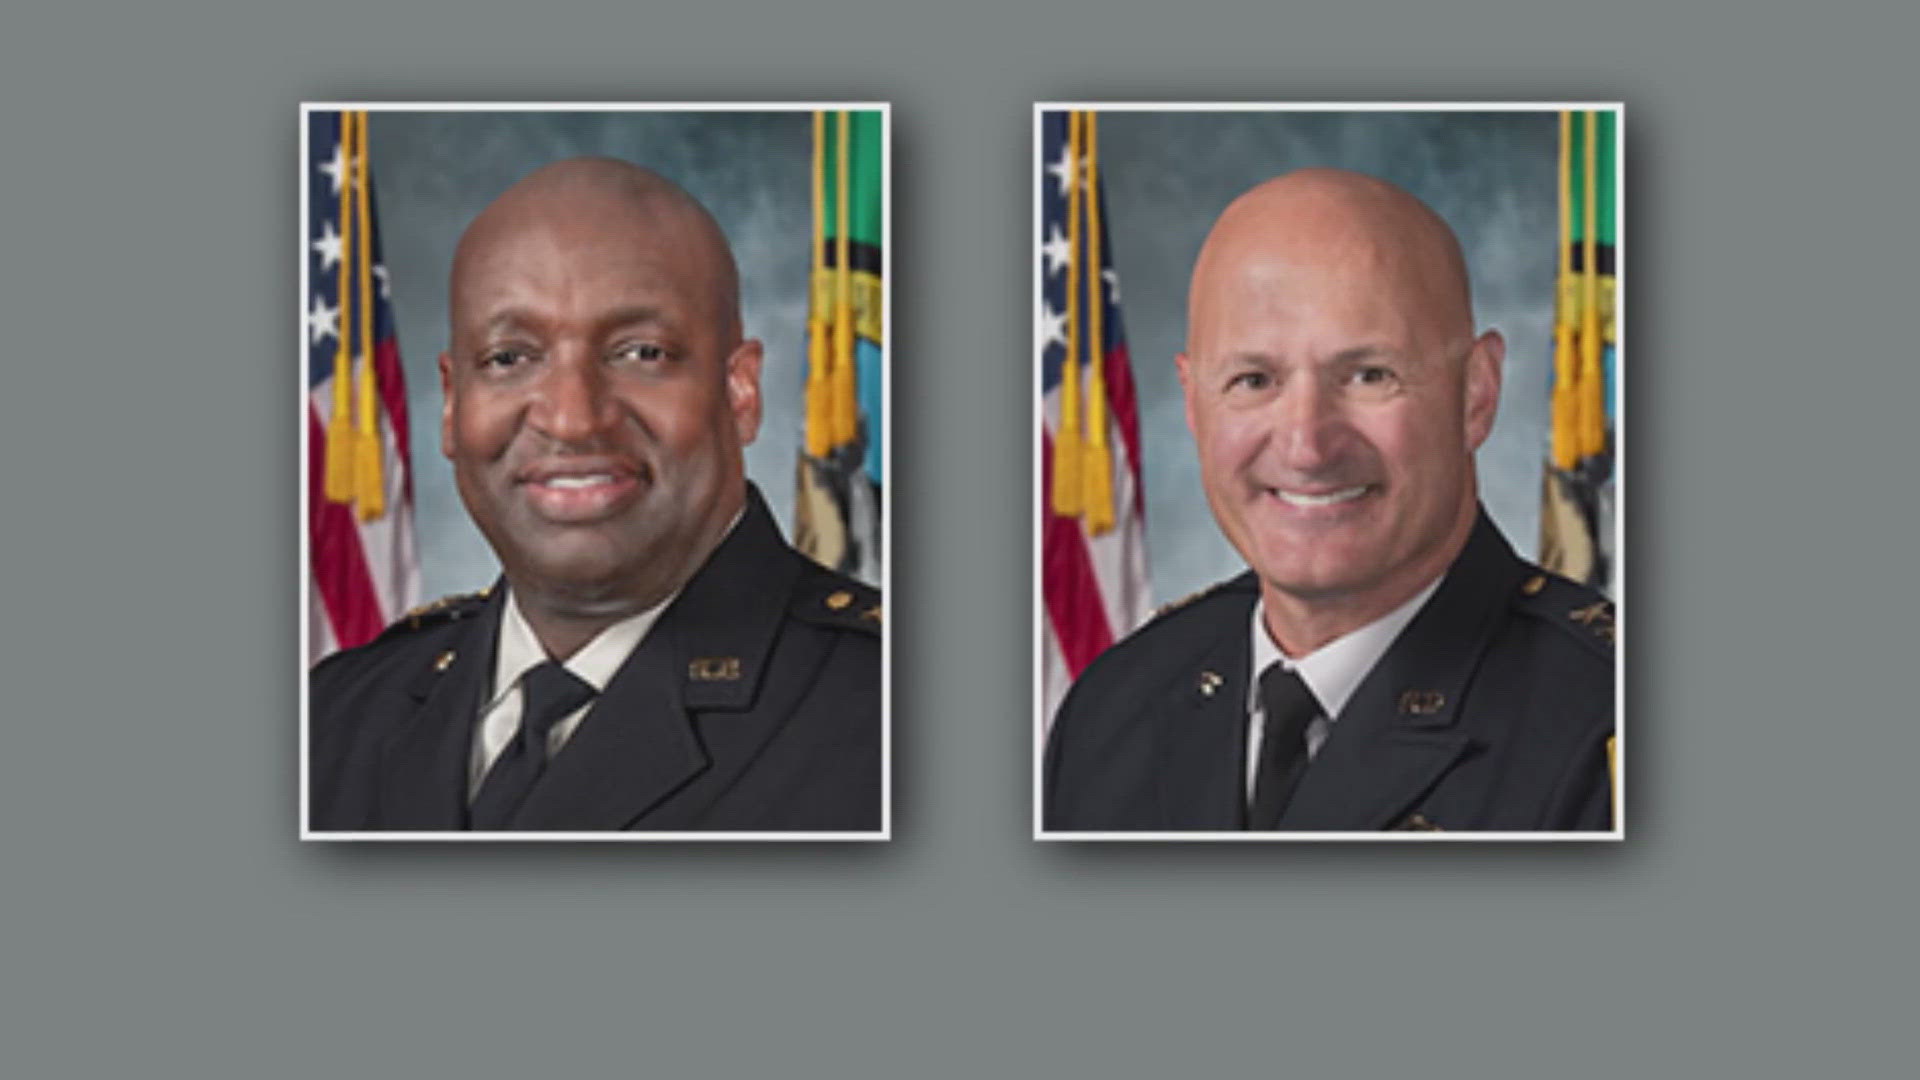 Assistant Chief Tyrone Davis and Deputy Chief Eric Barden are under criminal investigation related to alleged crimes against women, a KING 5 investigation finds.